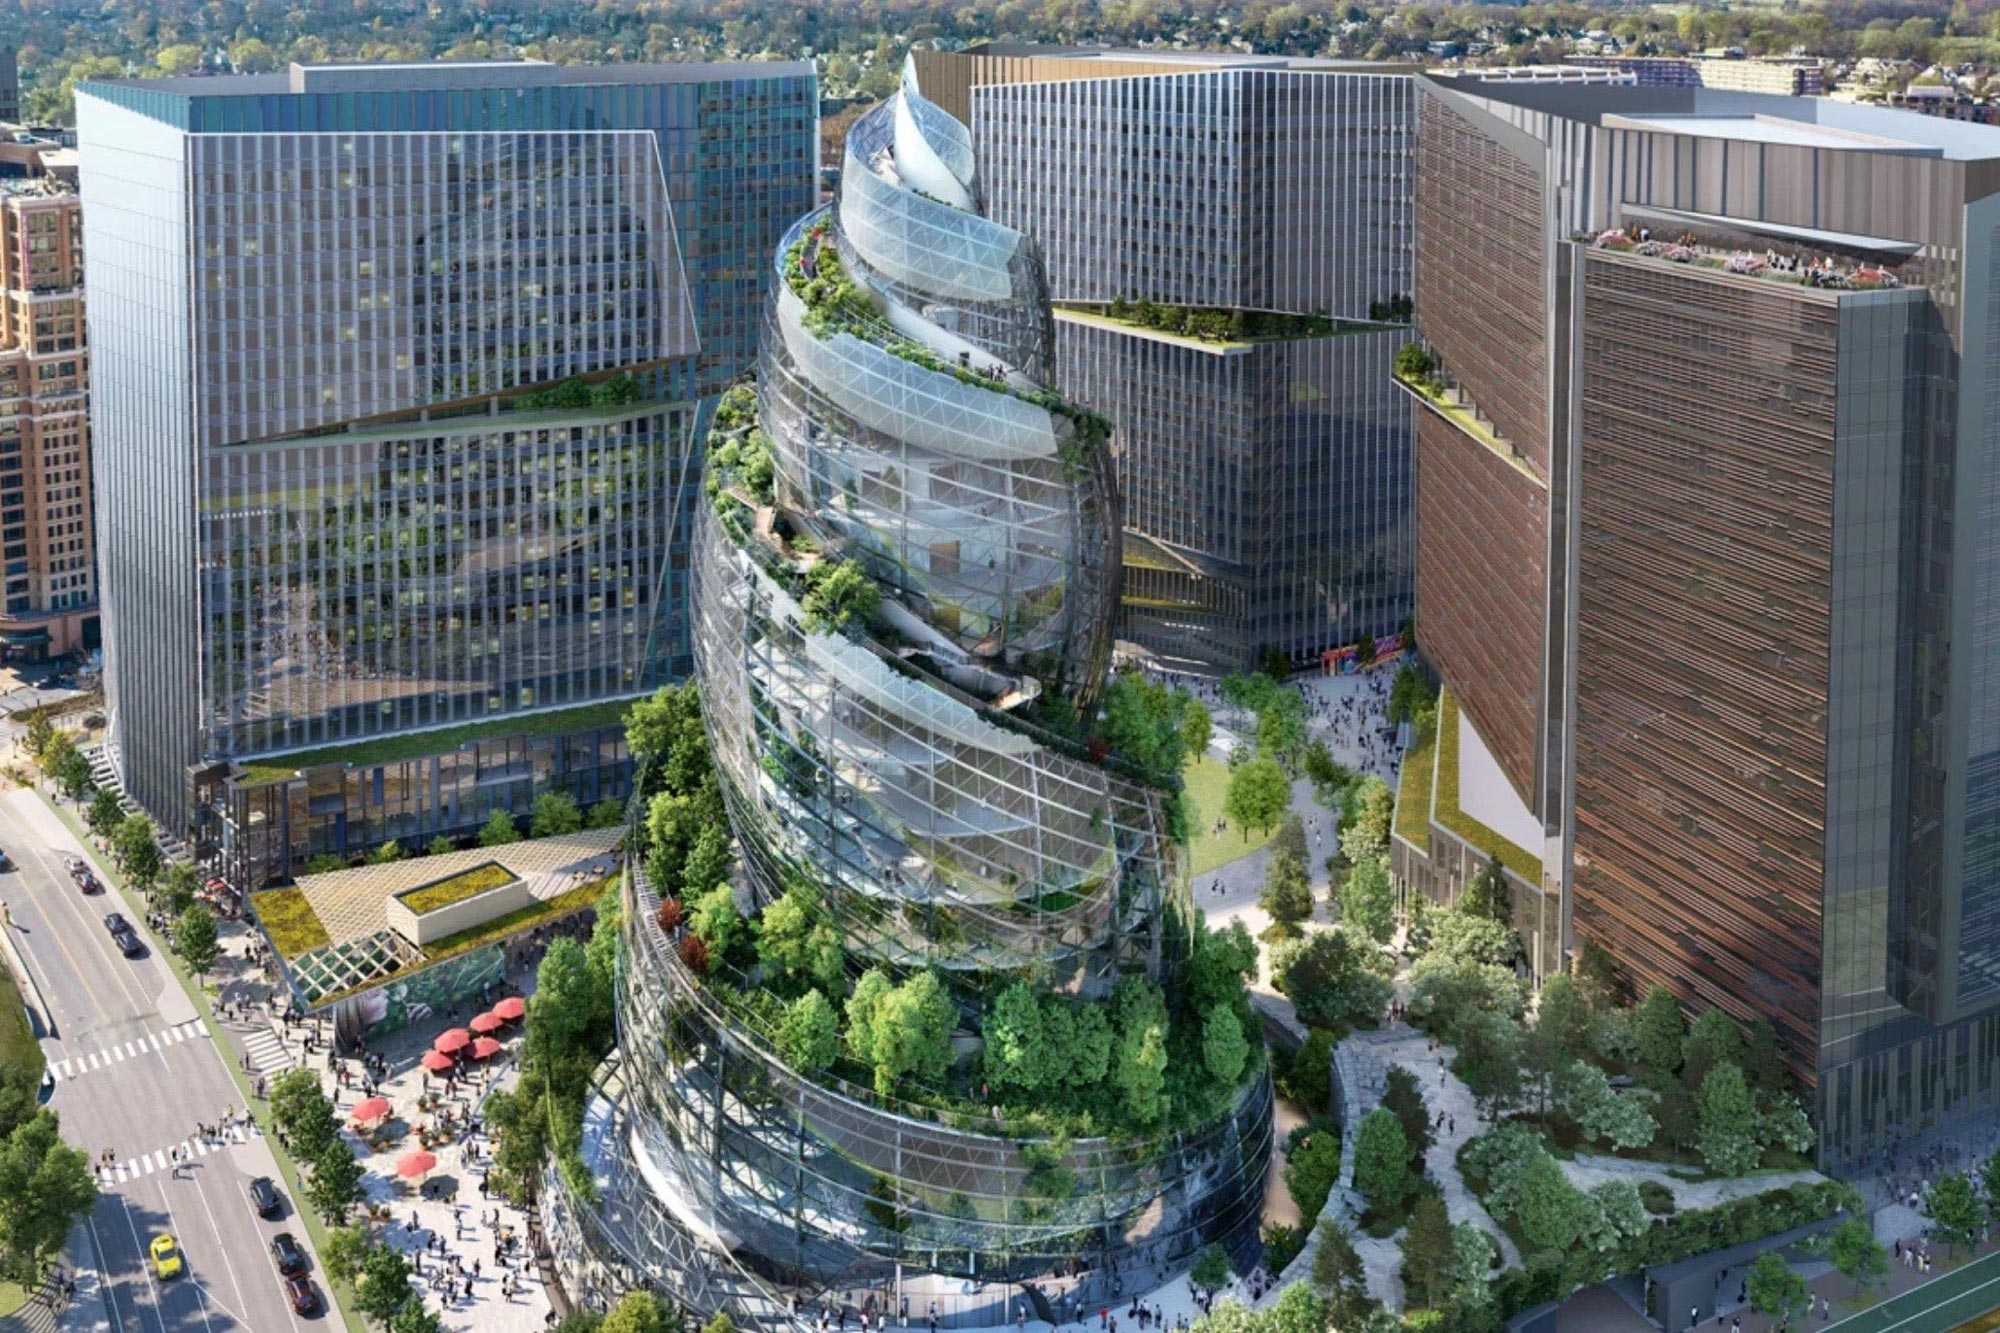 350-foot tall “Helix,” composed of steel, glass and even live trees